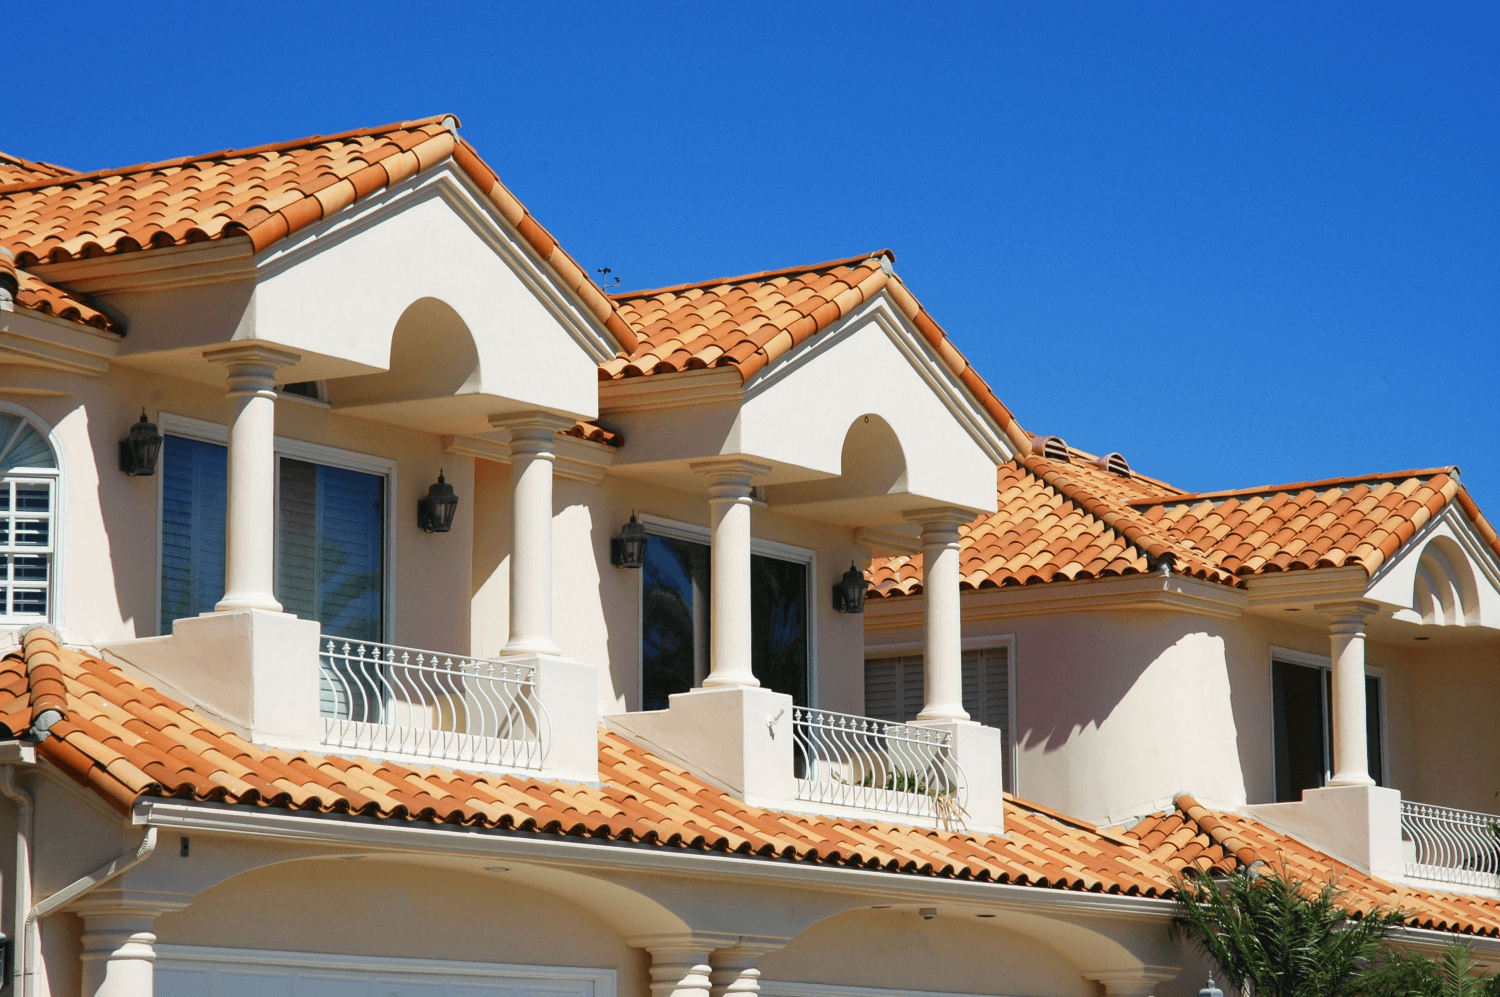 Roof Types Styles The Best Roofing, Tile Roof Homes